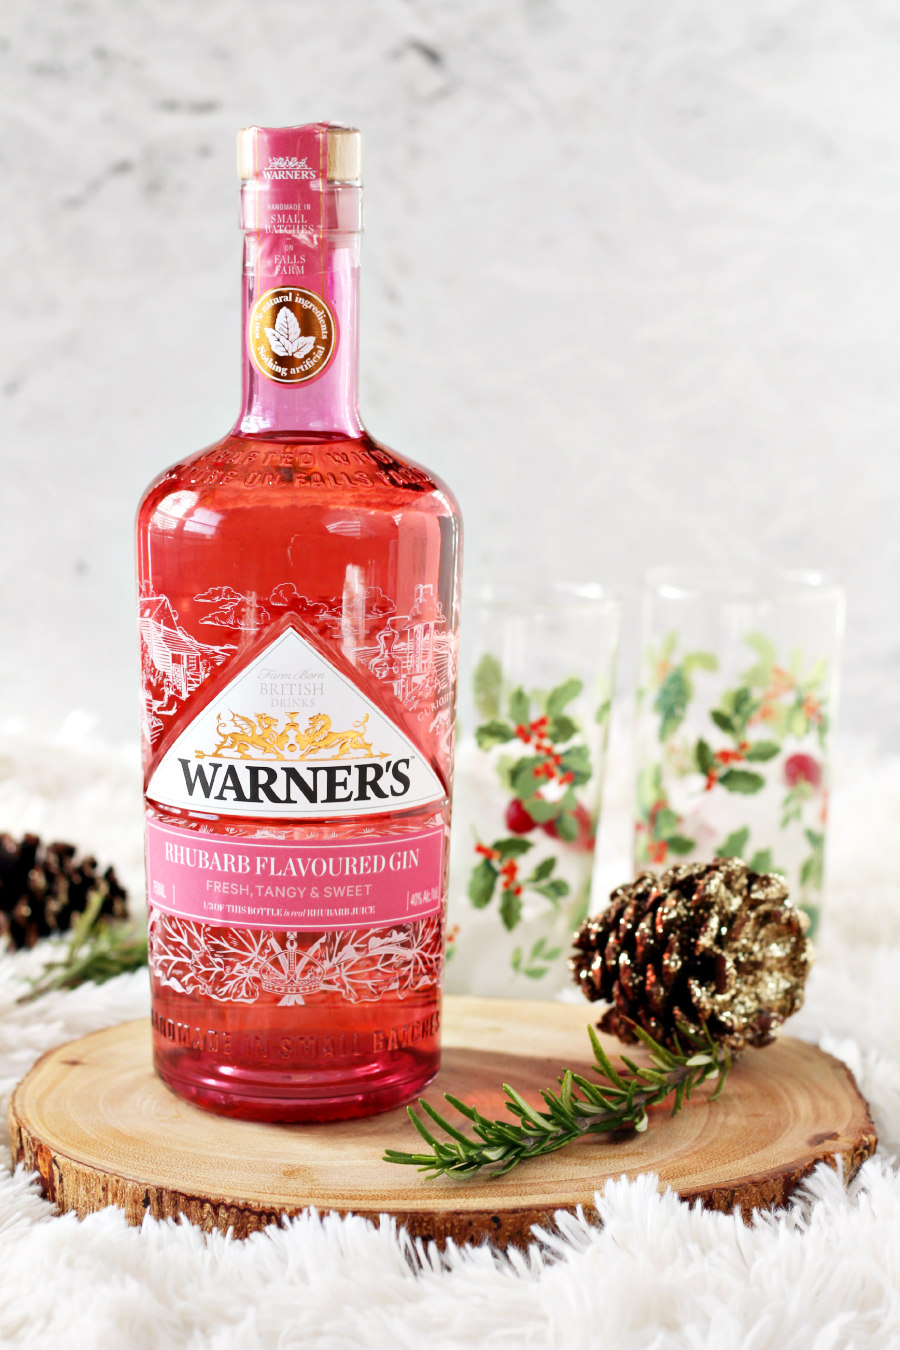 Bottle of Warner's Rhubarb Gin on wood slice with holly berry glasses in background. Fresh rosemary and sparkly pine cones also sit in photo.